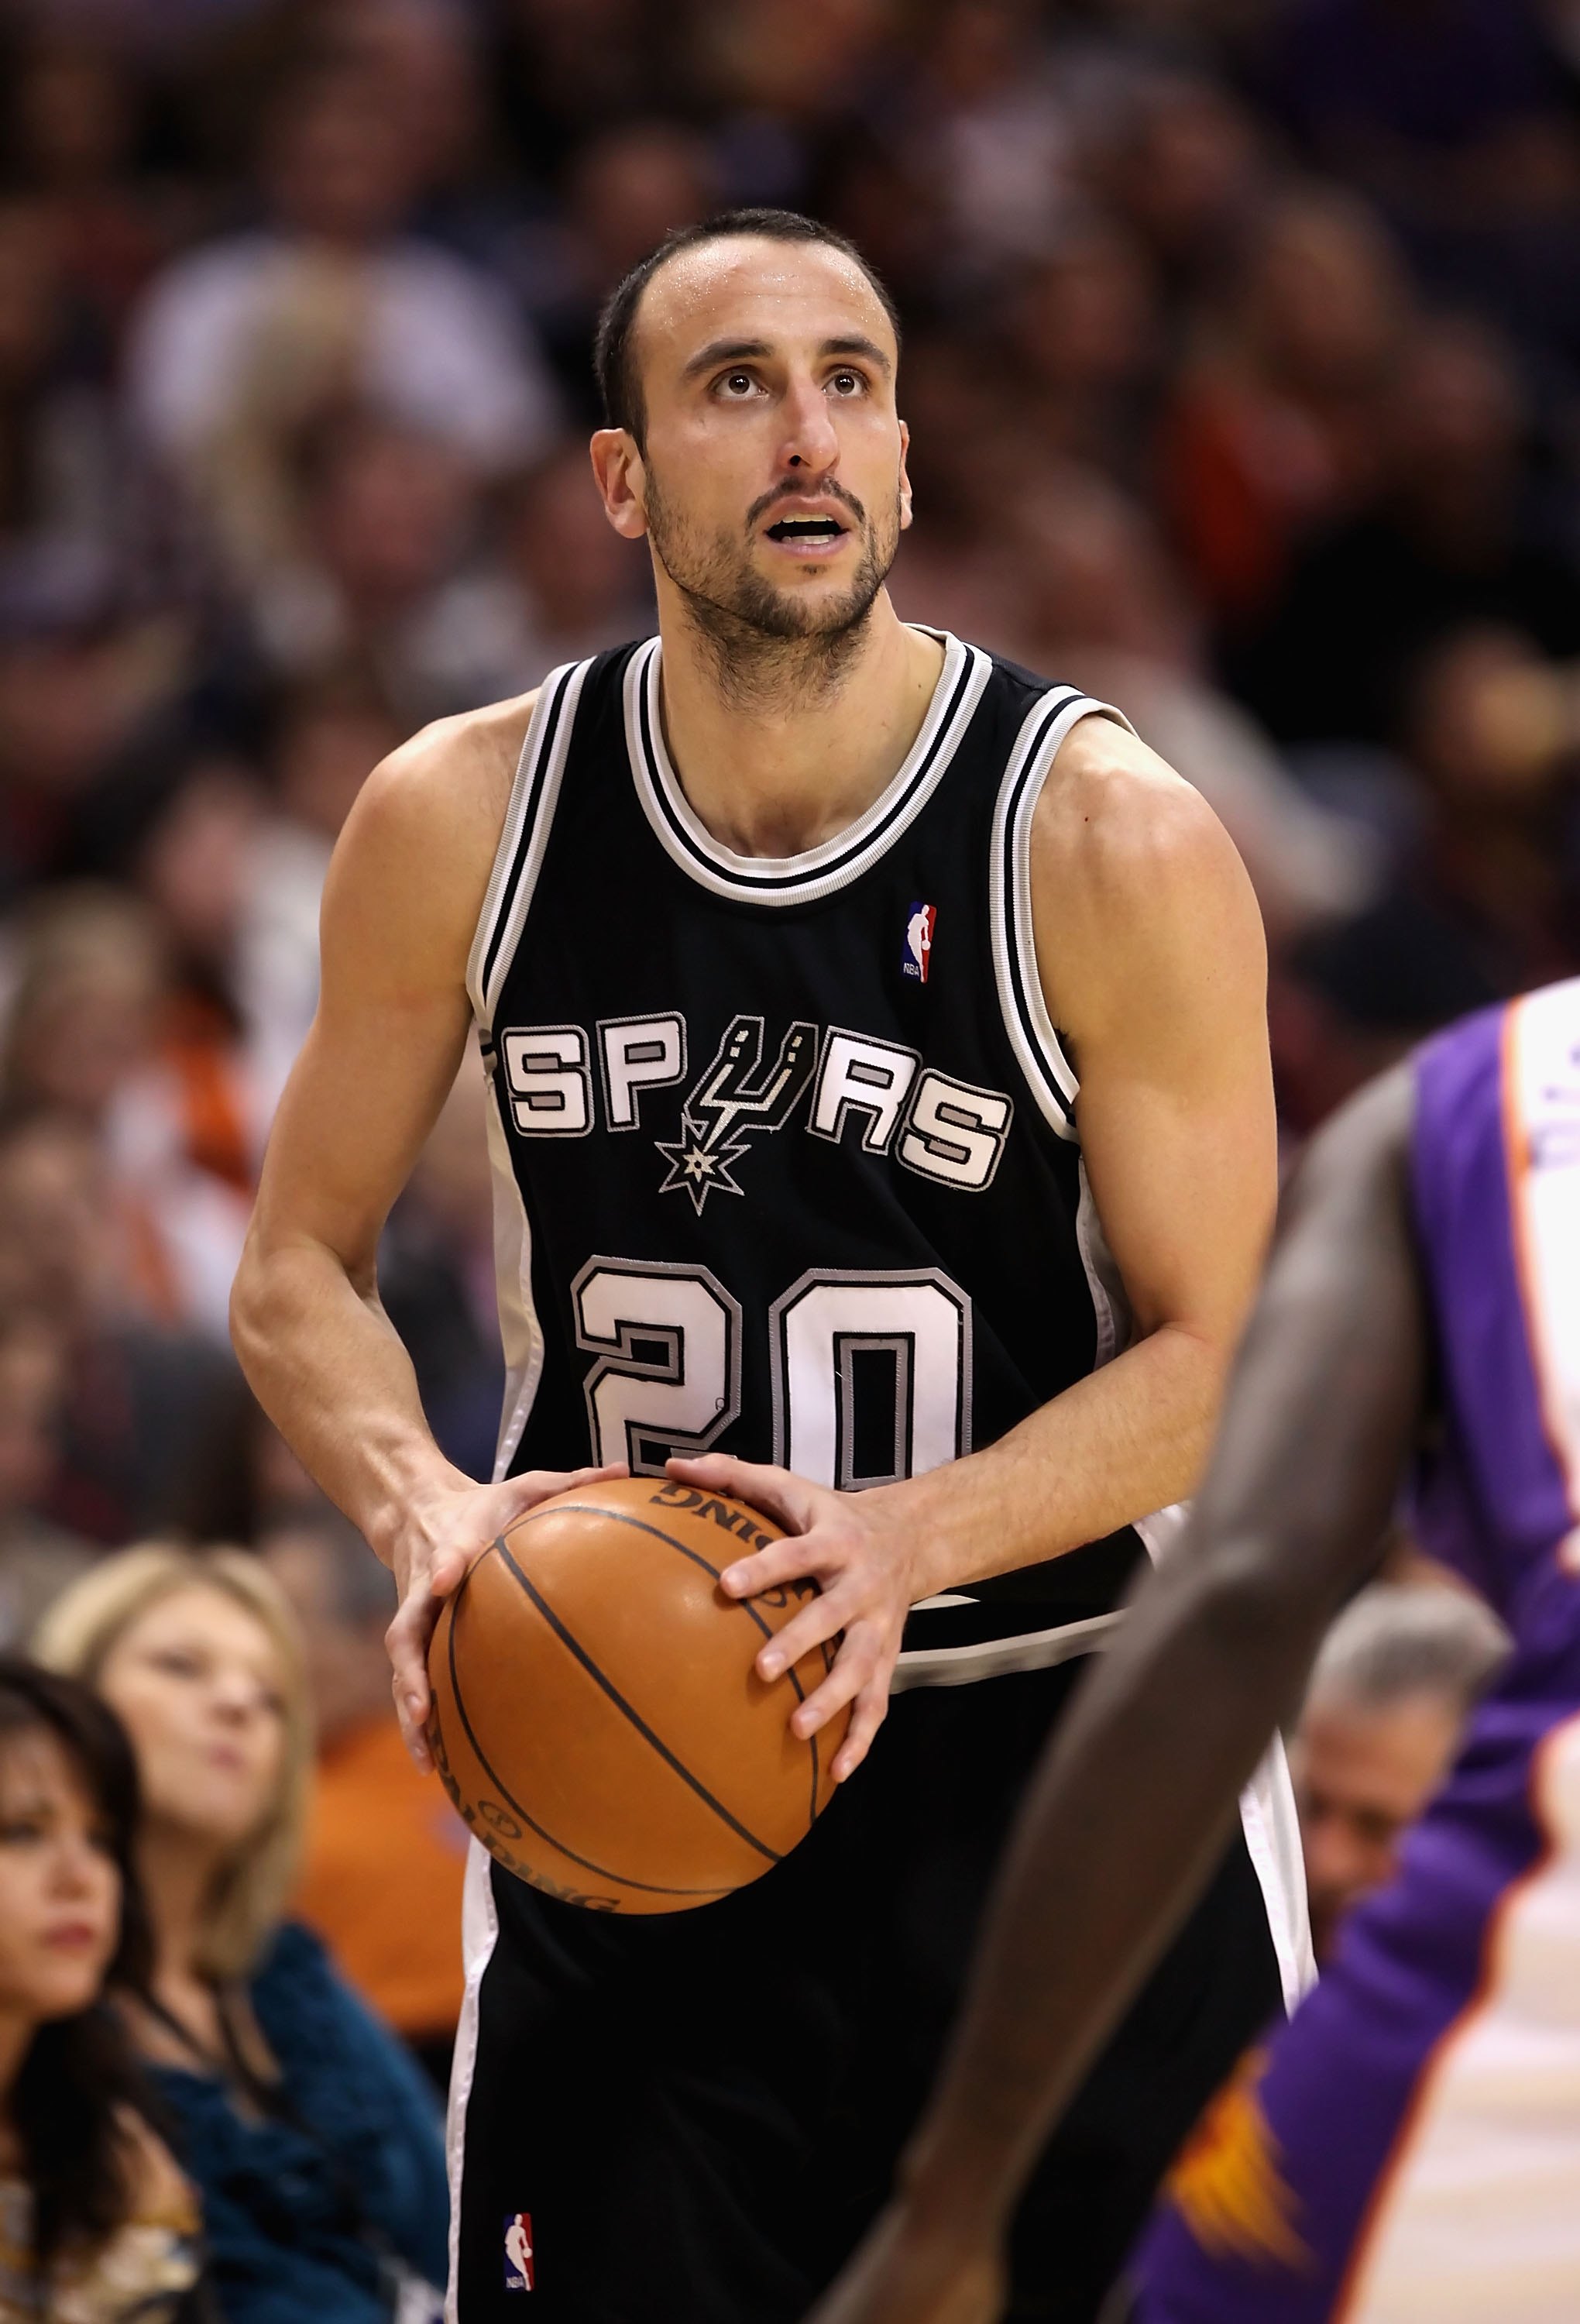 Manu Ginobili: Is the San Antonio Spur a Lock for the Basketball